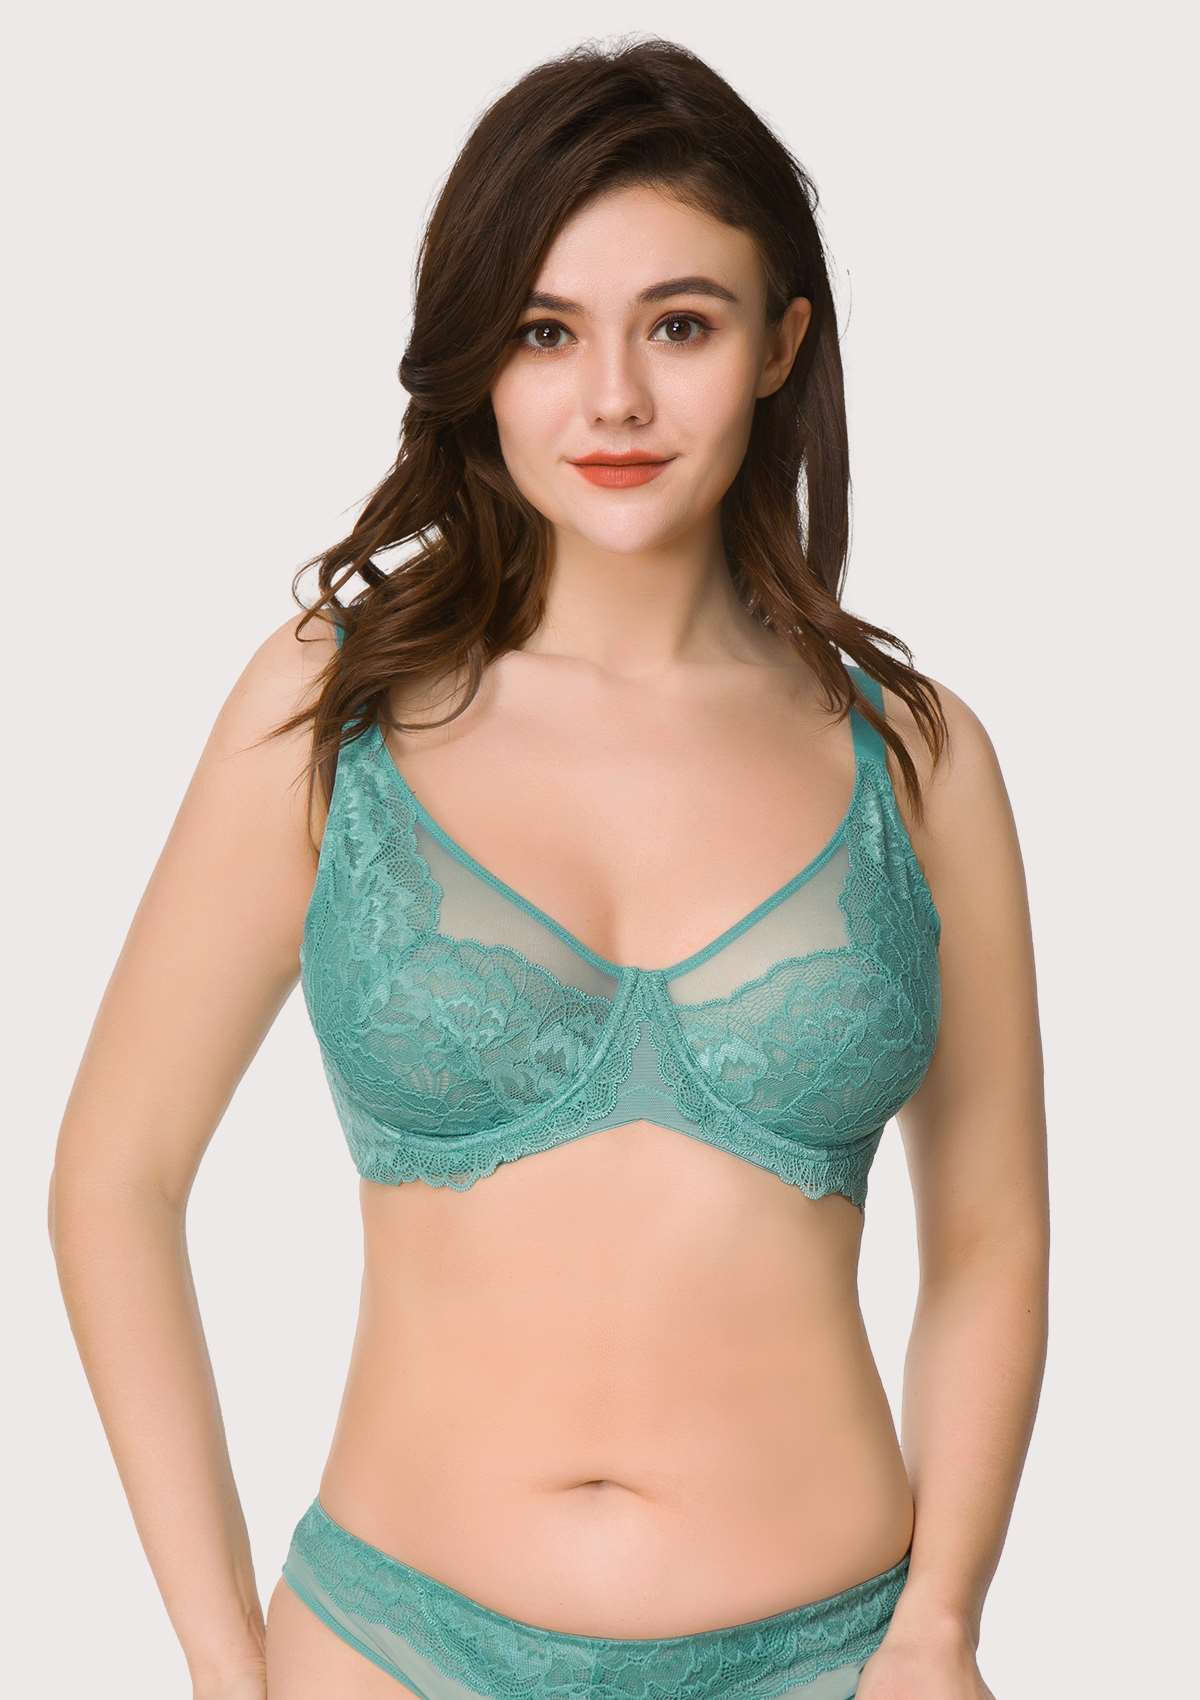 HSIA Peony Lace Unlined Supportive Underwire Bra - Green / 34 / C